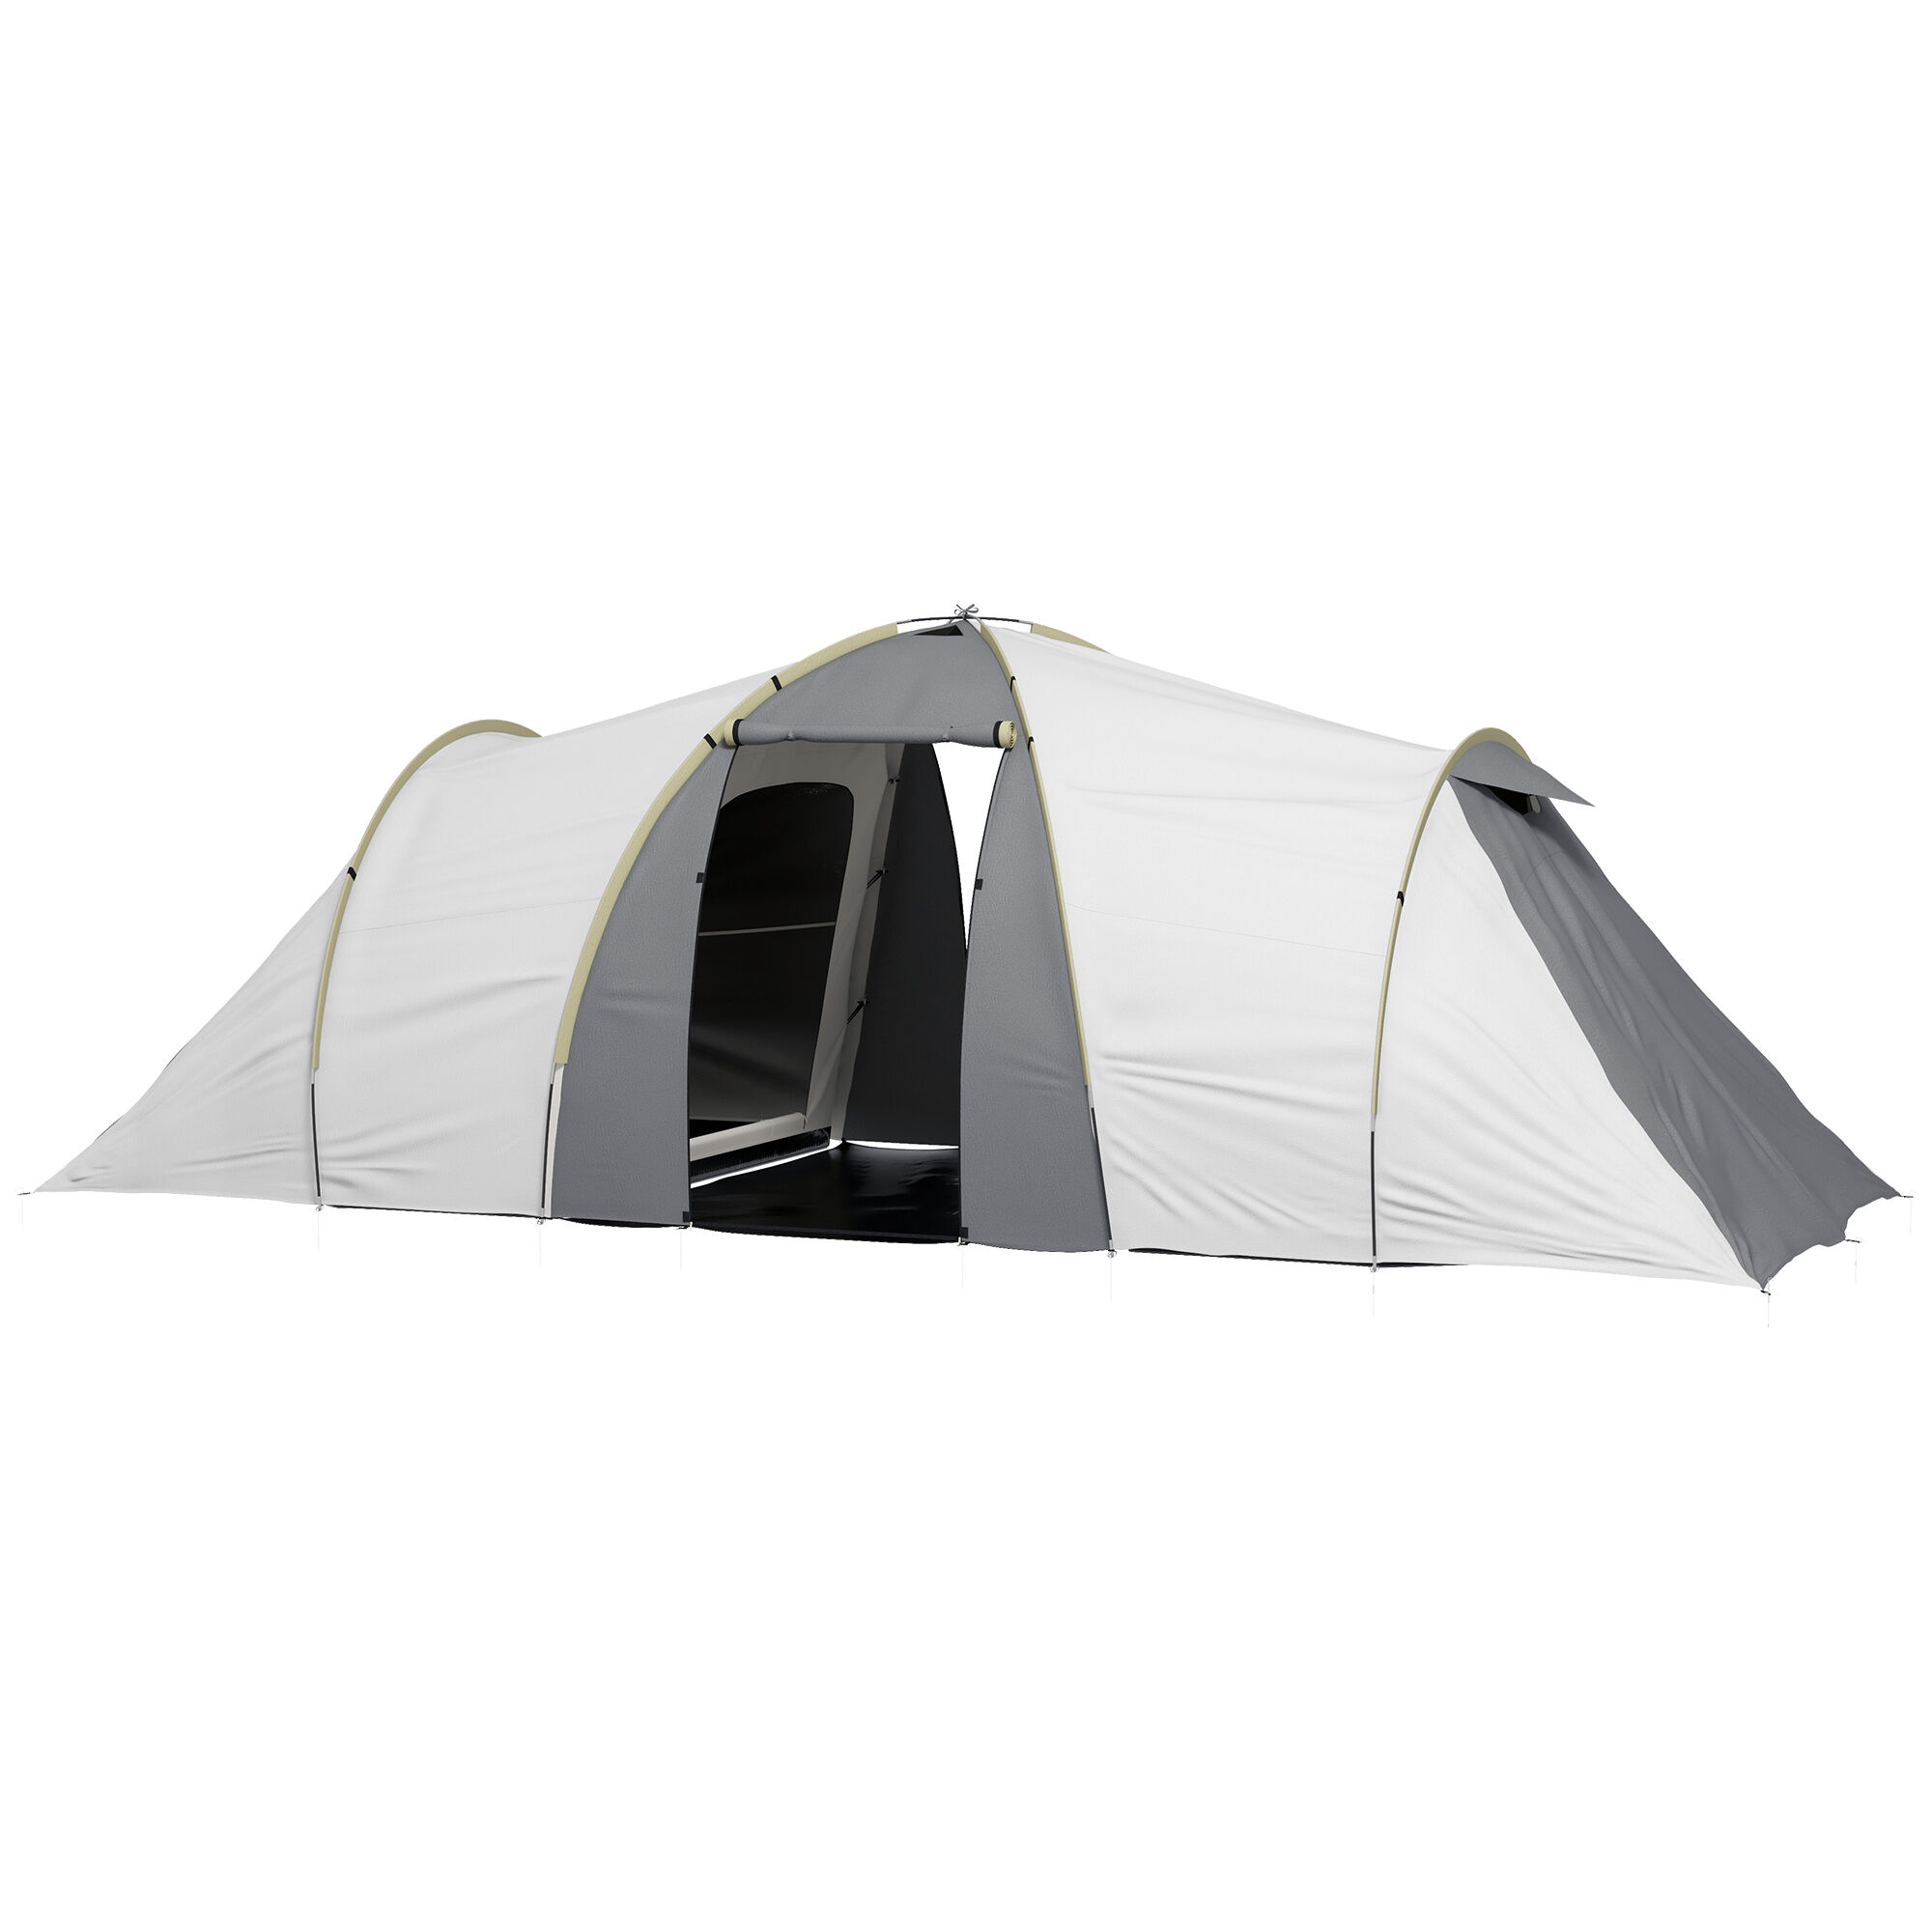 Outsunny 4-6 Person Tunnel Tent, Two Bedrooms, 2000mm Waterproof, UV50+ Protection, Ideal for Outdoor Activities, Carry Bag Included